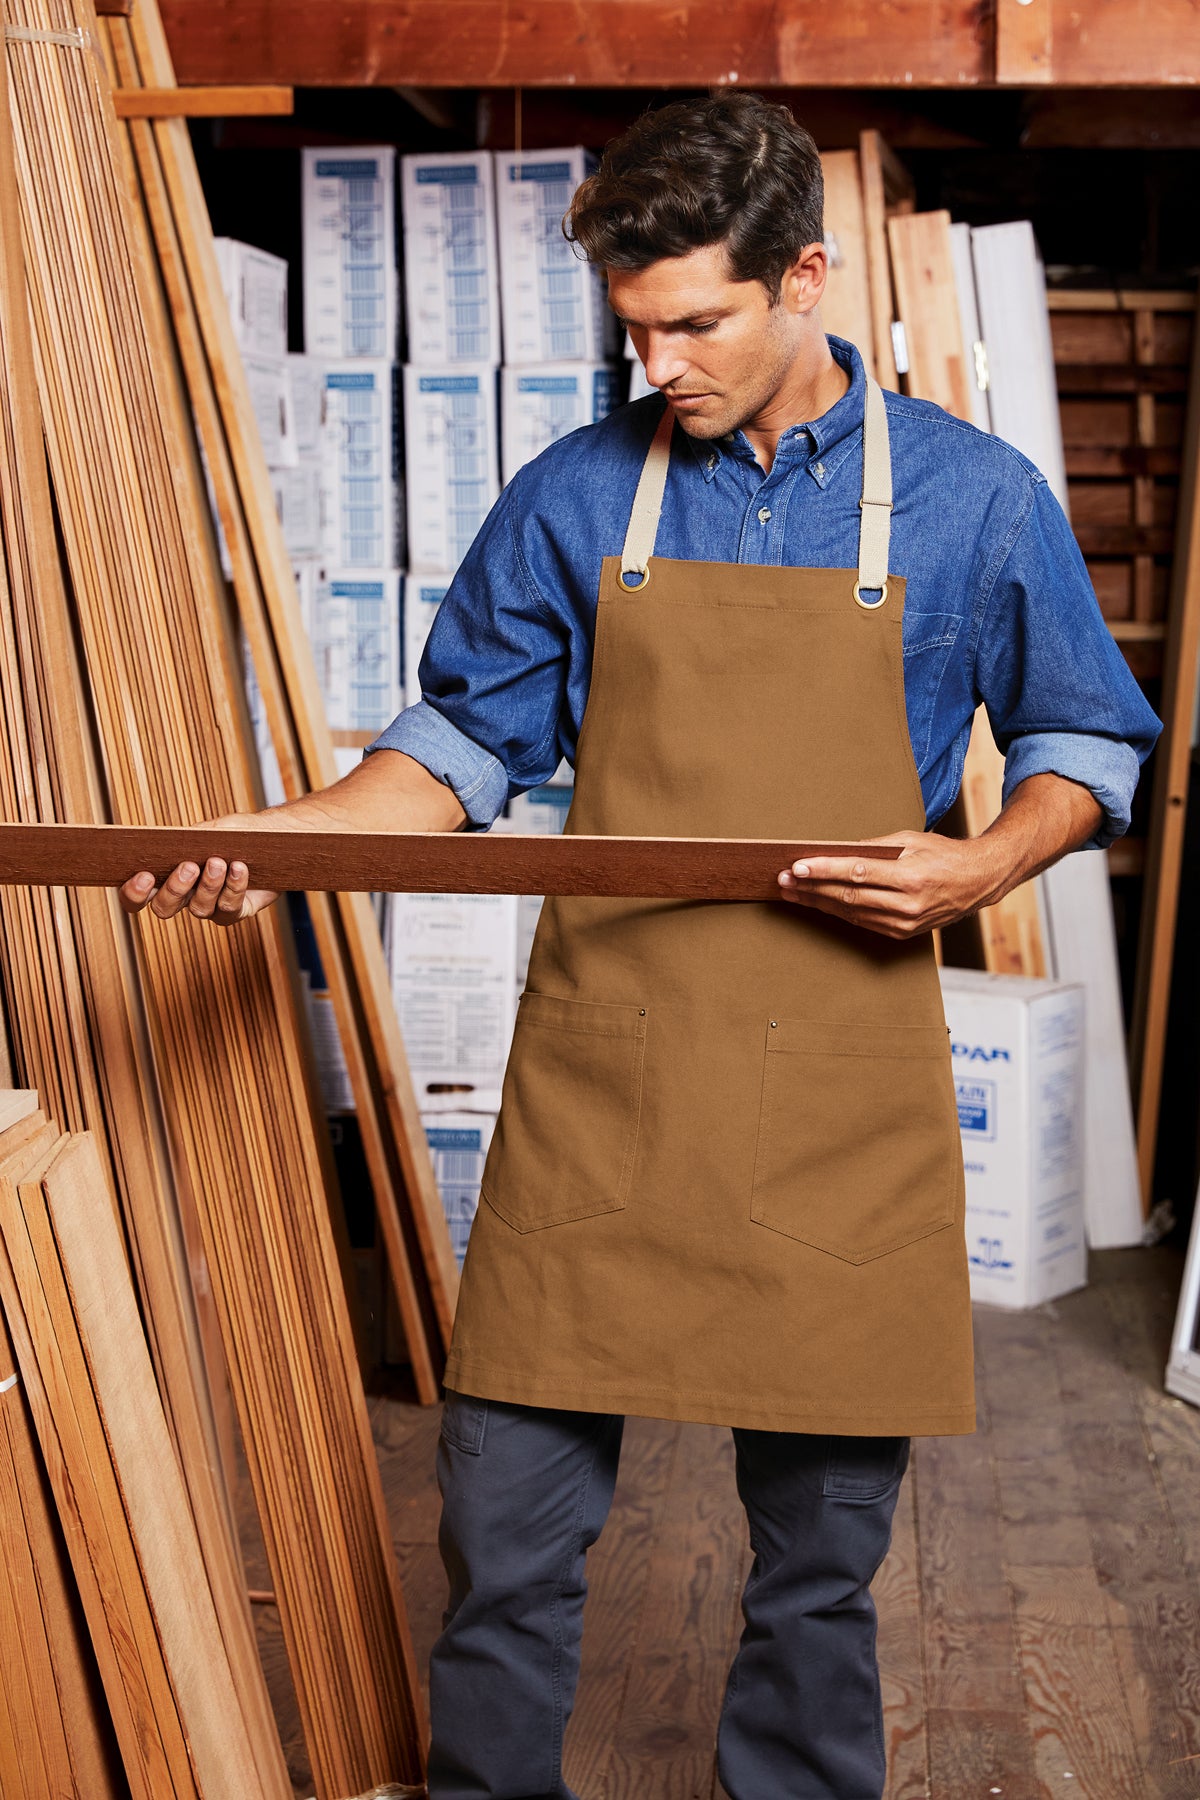 A815 Port Authority Canvas Full-Length Two-Pocket Apron